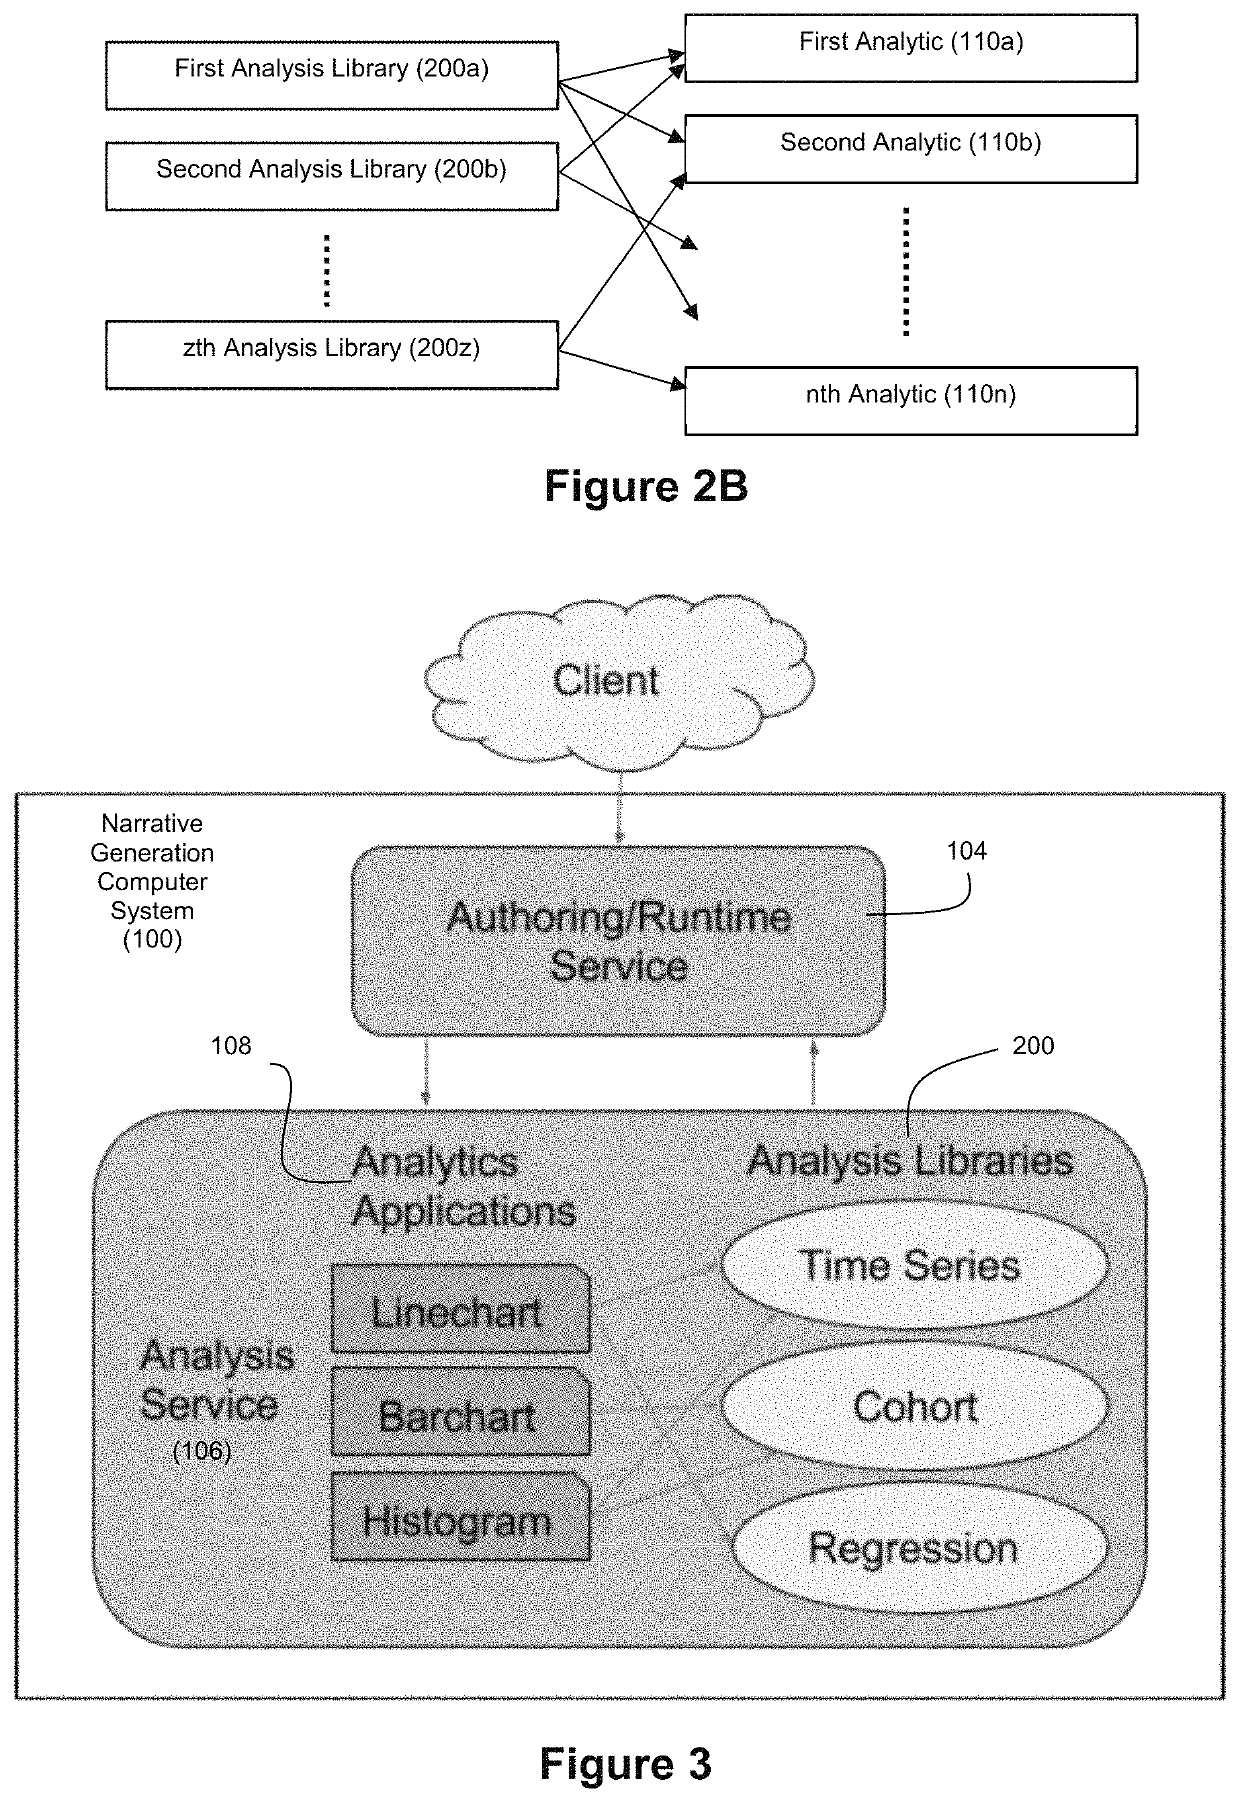 Applied artificial intelligence technology for narrative generation using an invocable analysis service with analysis libraries